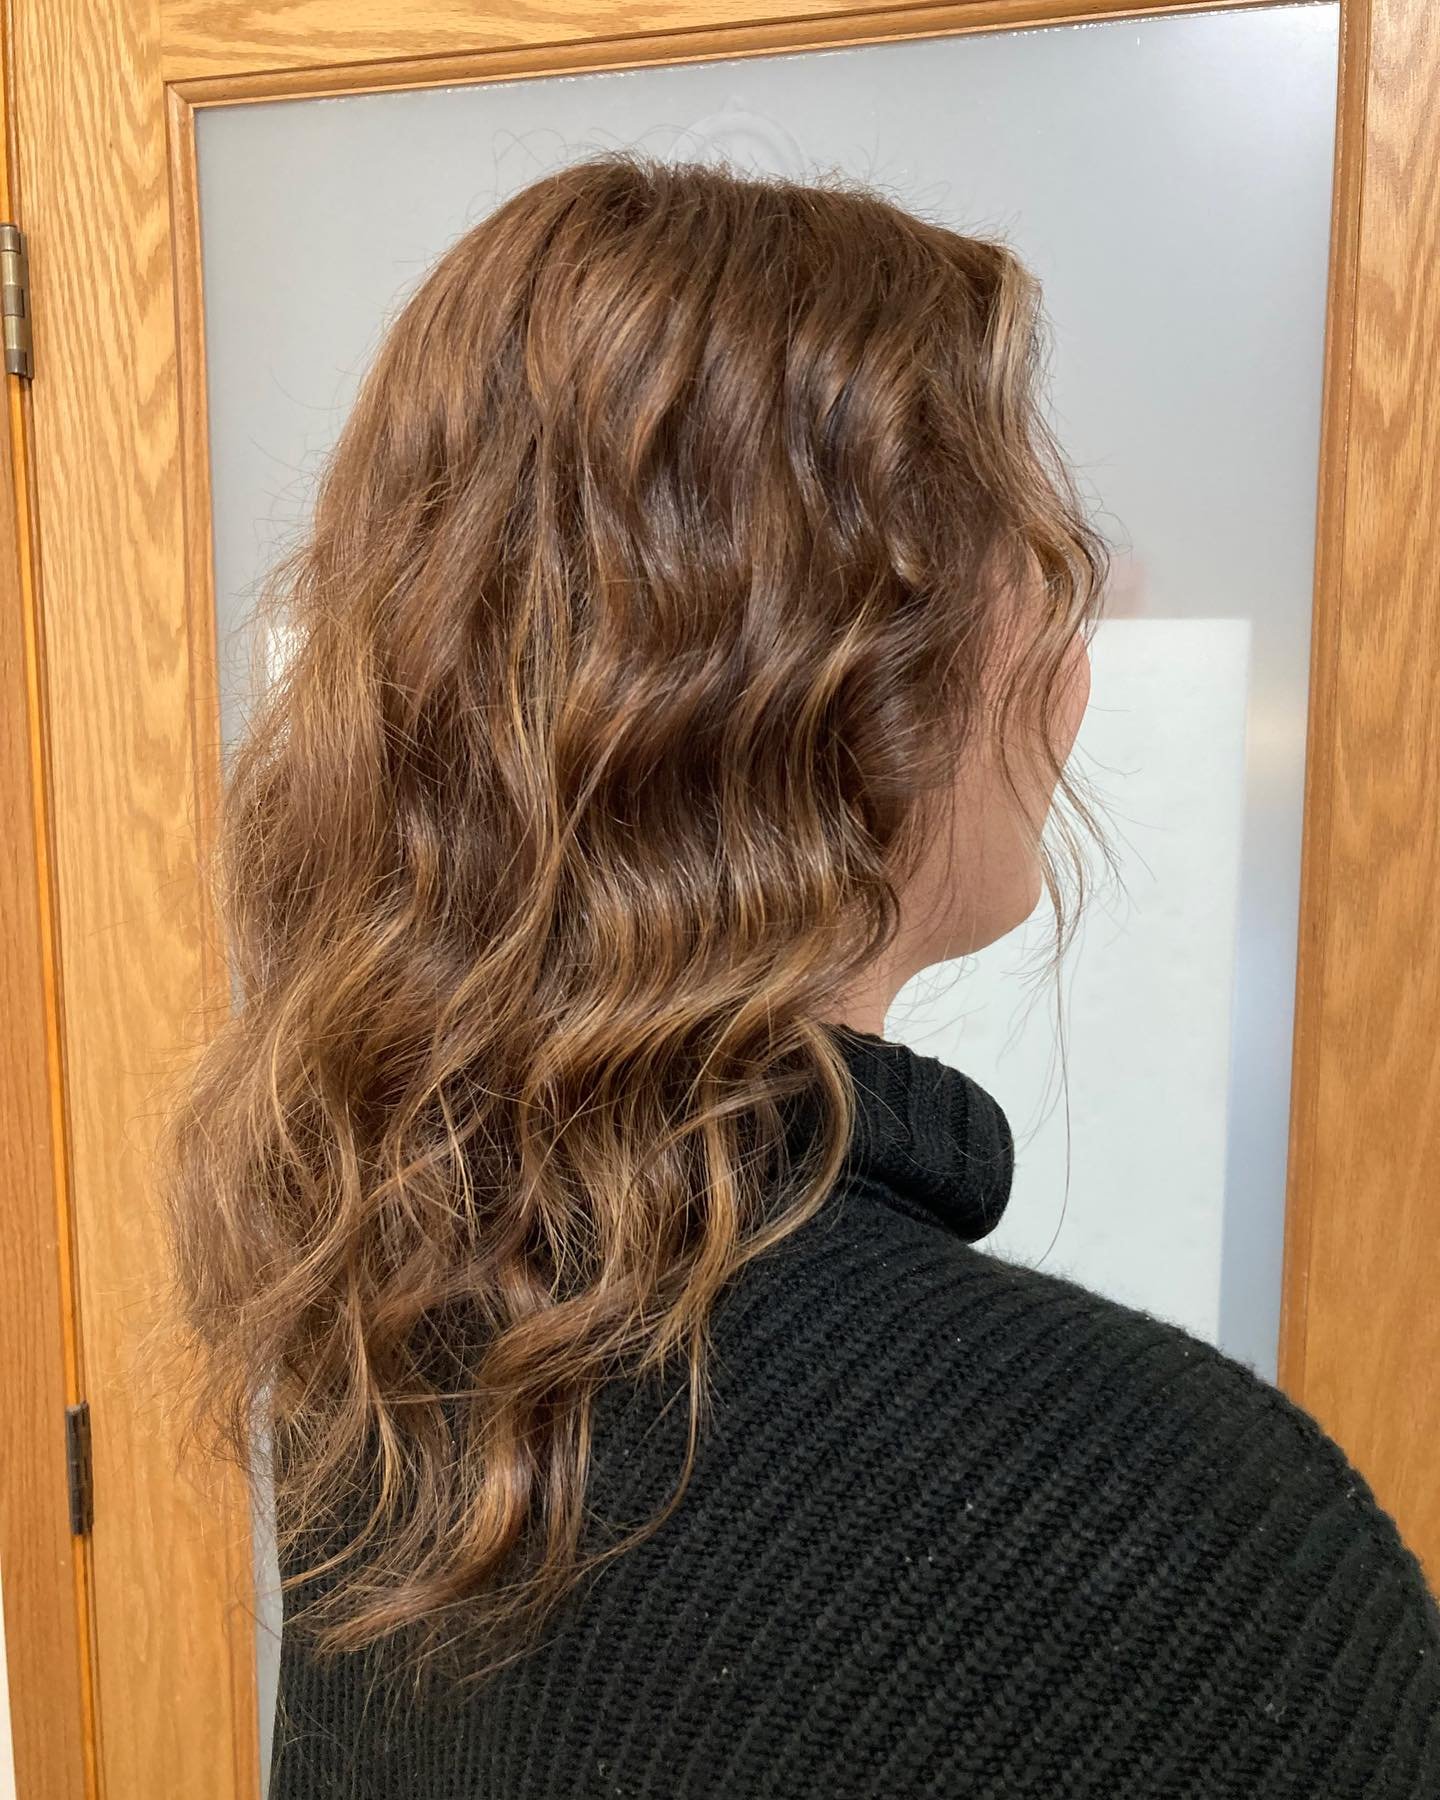 Check out this amazing transformation on my client! 

She went from grown out roots and blonde ends to a beautiful expensive brunette with natural lighter pieces in the ends of her hair. 

You look stunning!!! 

#wausau #wausauwi  #stevenspoint #shop